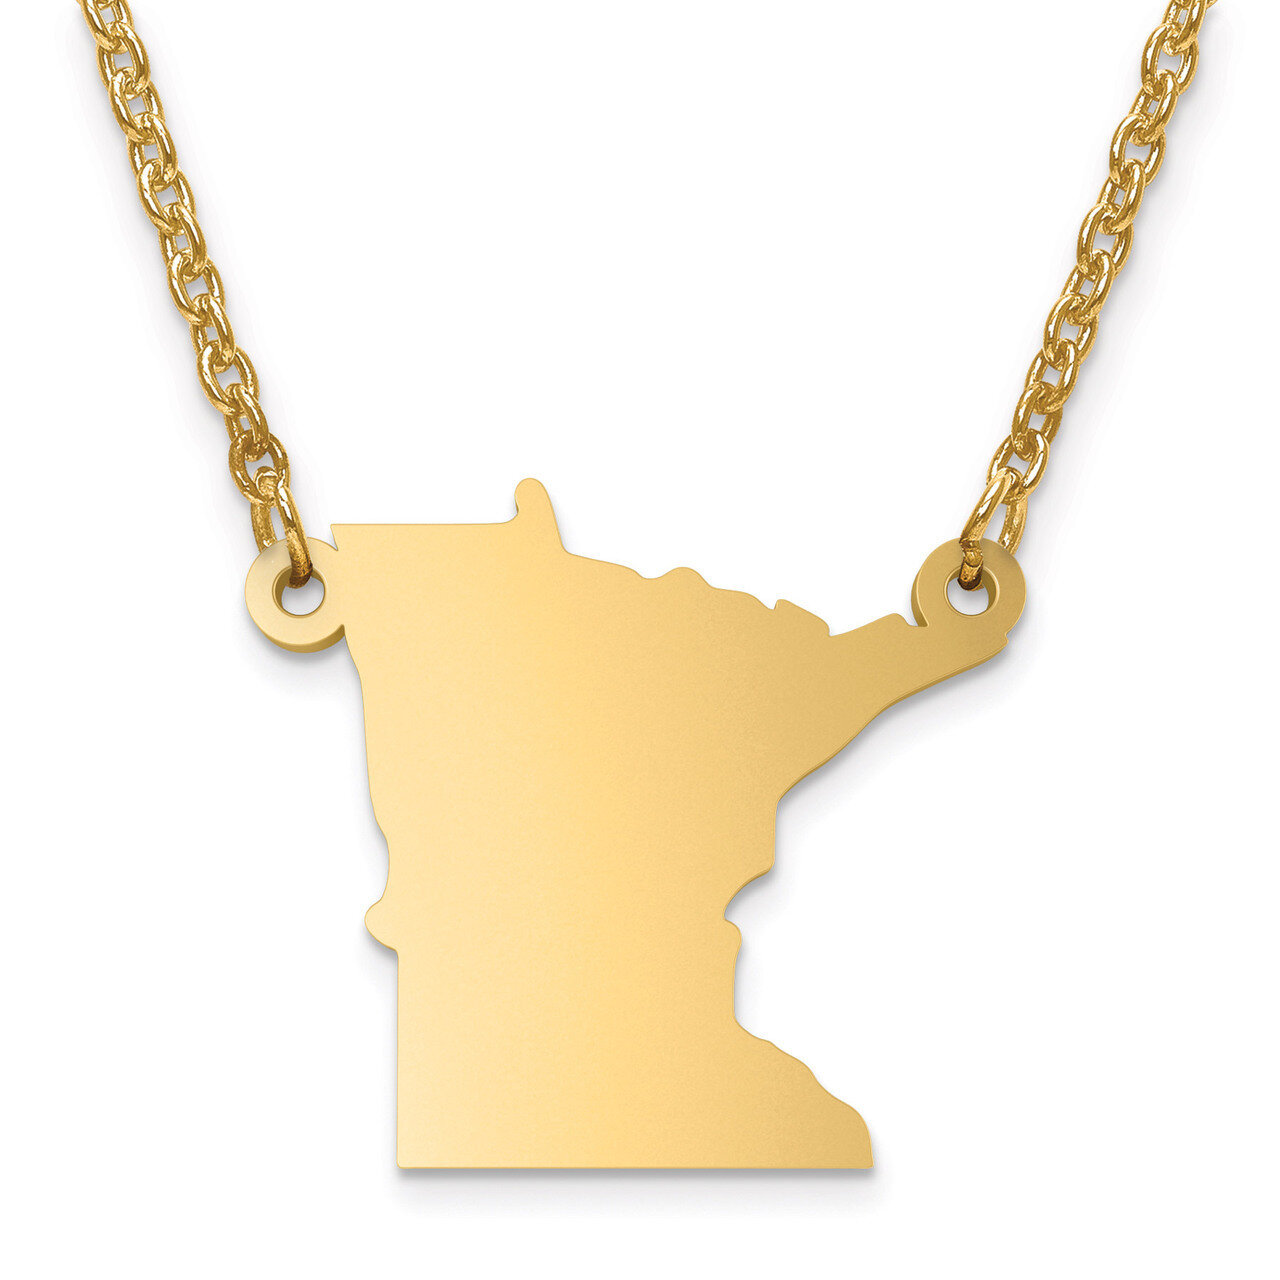 Minnesota State Pendant with Chain Engravable Gold-plated on Sterling Silver